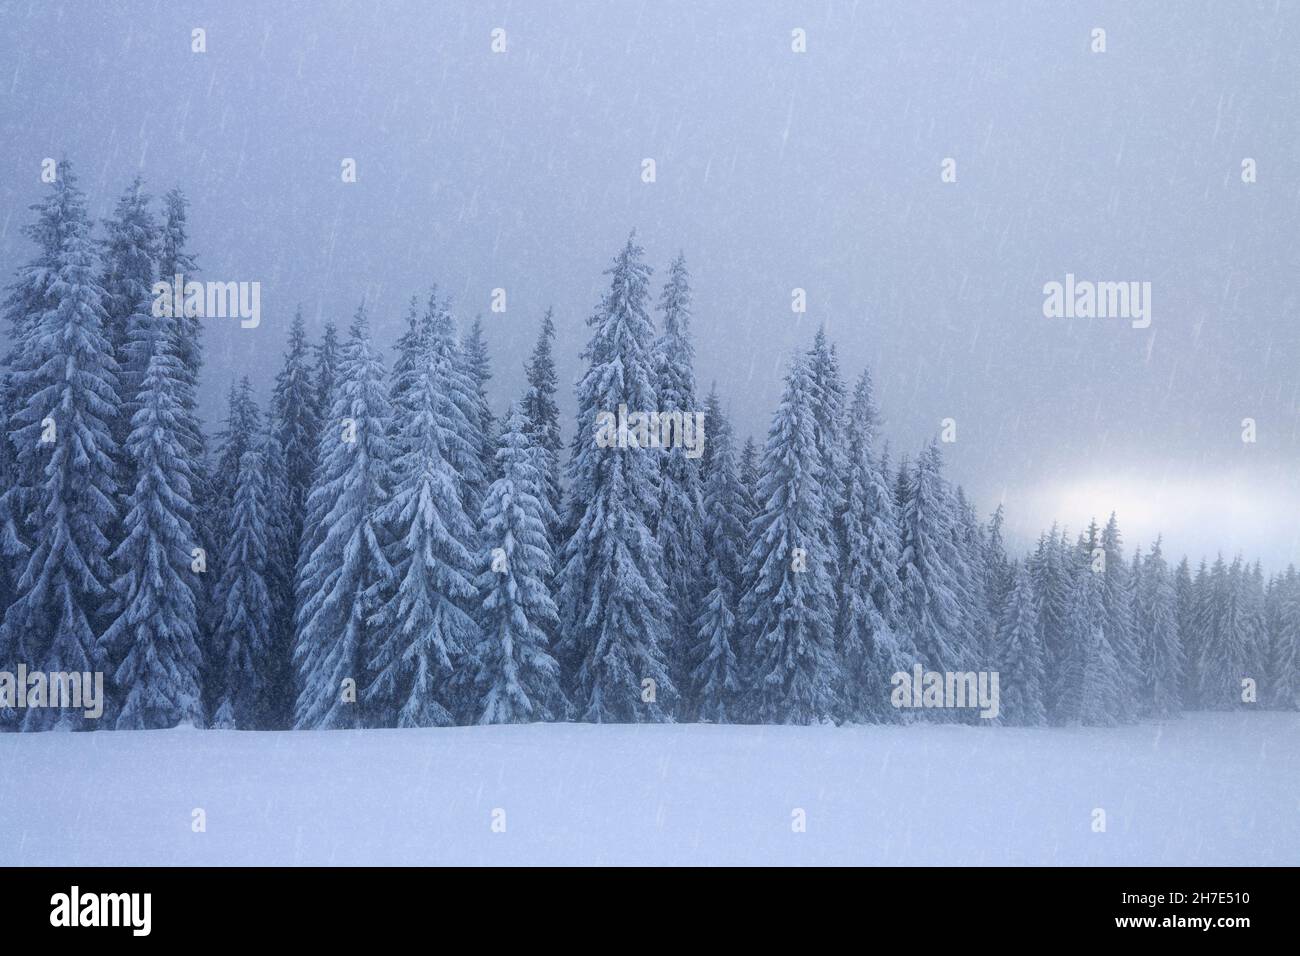 Winter Background With Snowy Fir Trees, Snowdrifts And Snowfall In